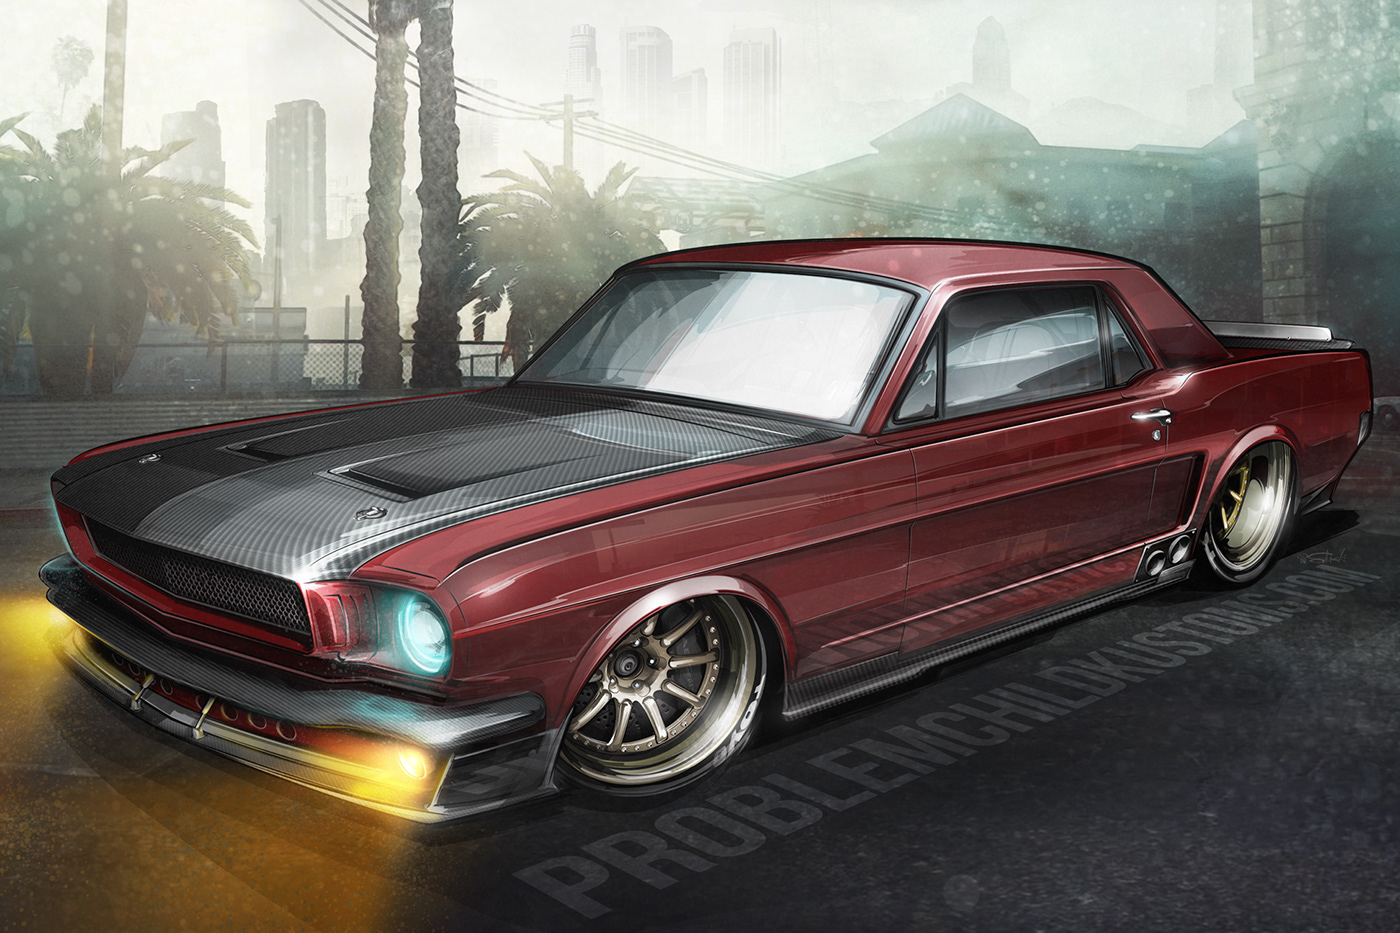 Concept rendering of a custom 1965 Ford Mustang by Brian Stupski